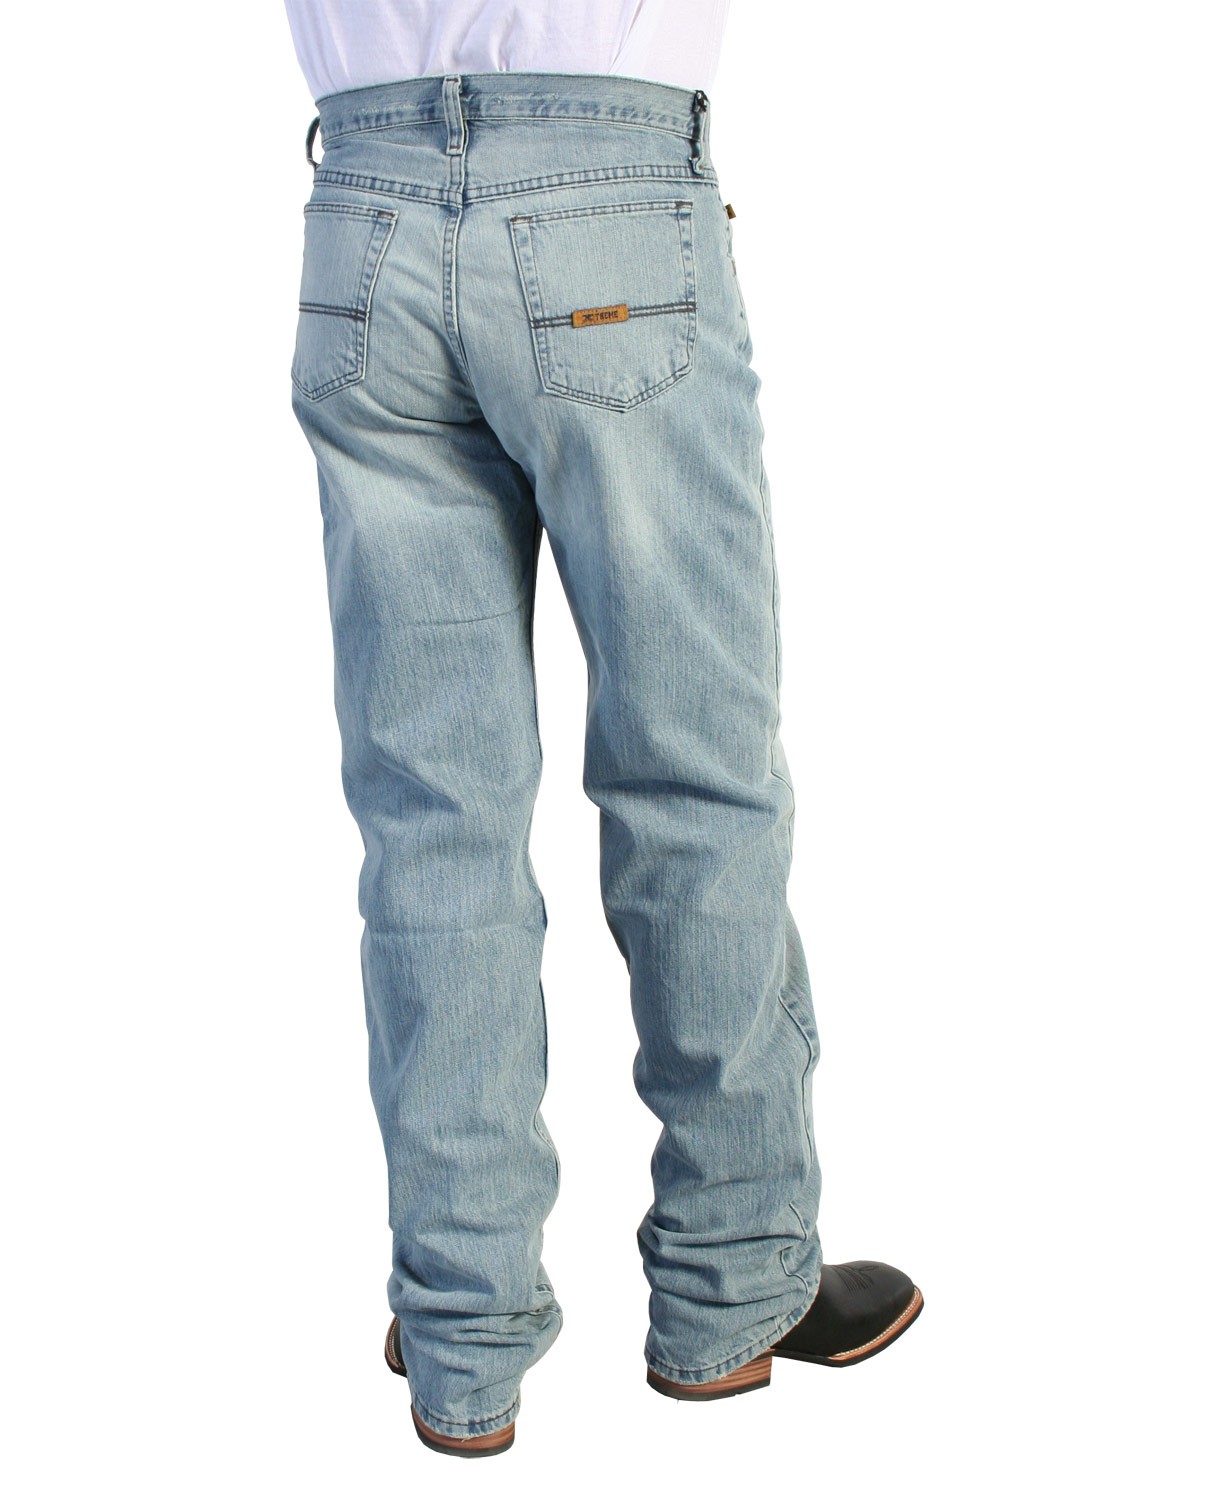 33MWZ Cowboy Jeans - Tall - Fort Brands